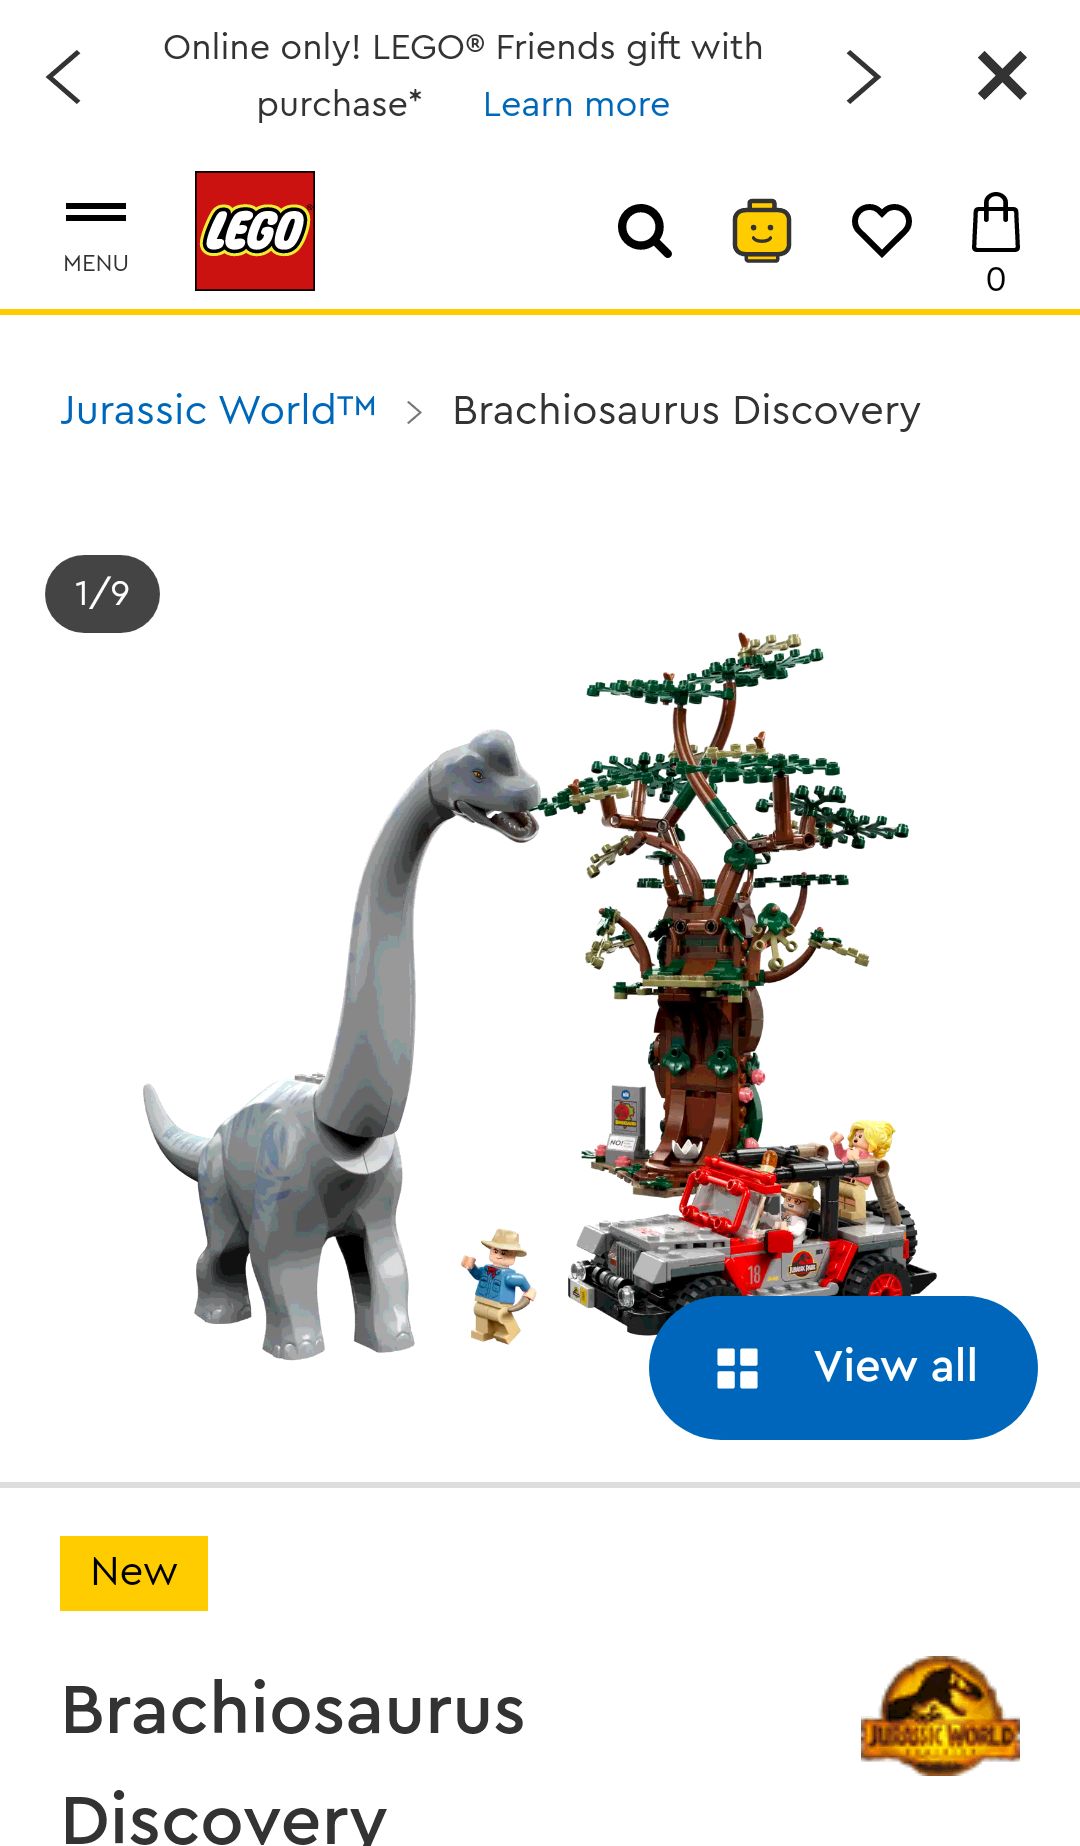 Brachiosaurus Discovery 76960 | Jurassic World™ | Buy online at the Official LEGO® Shop US